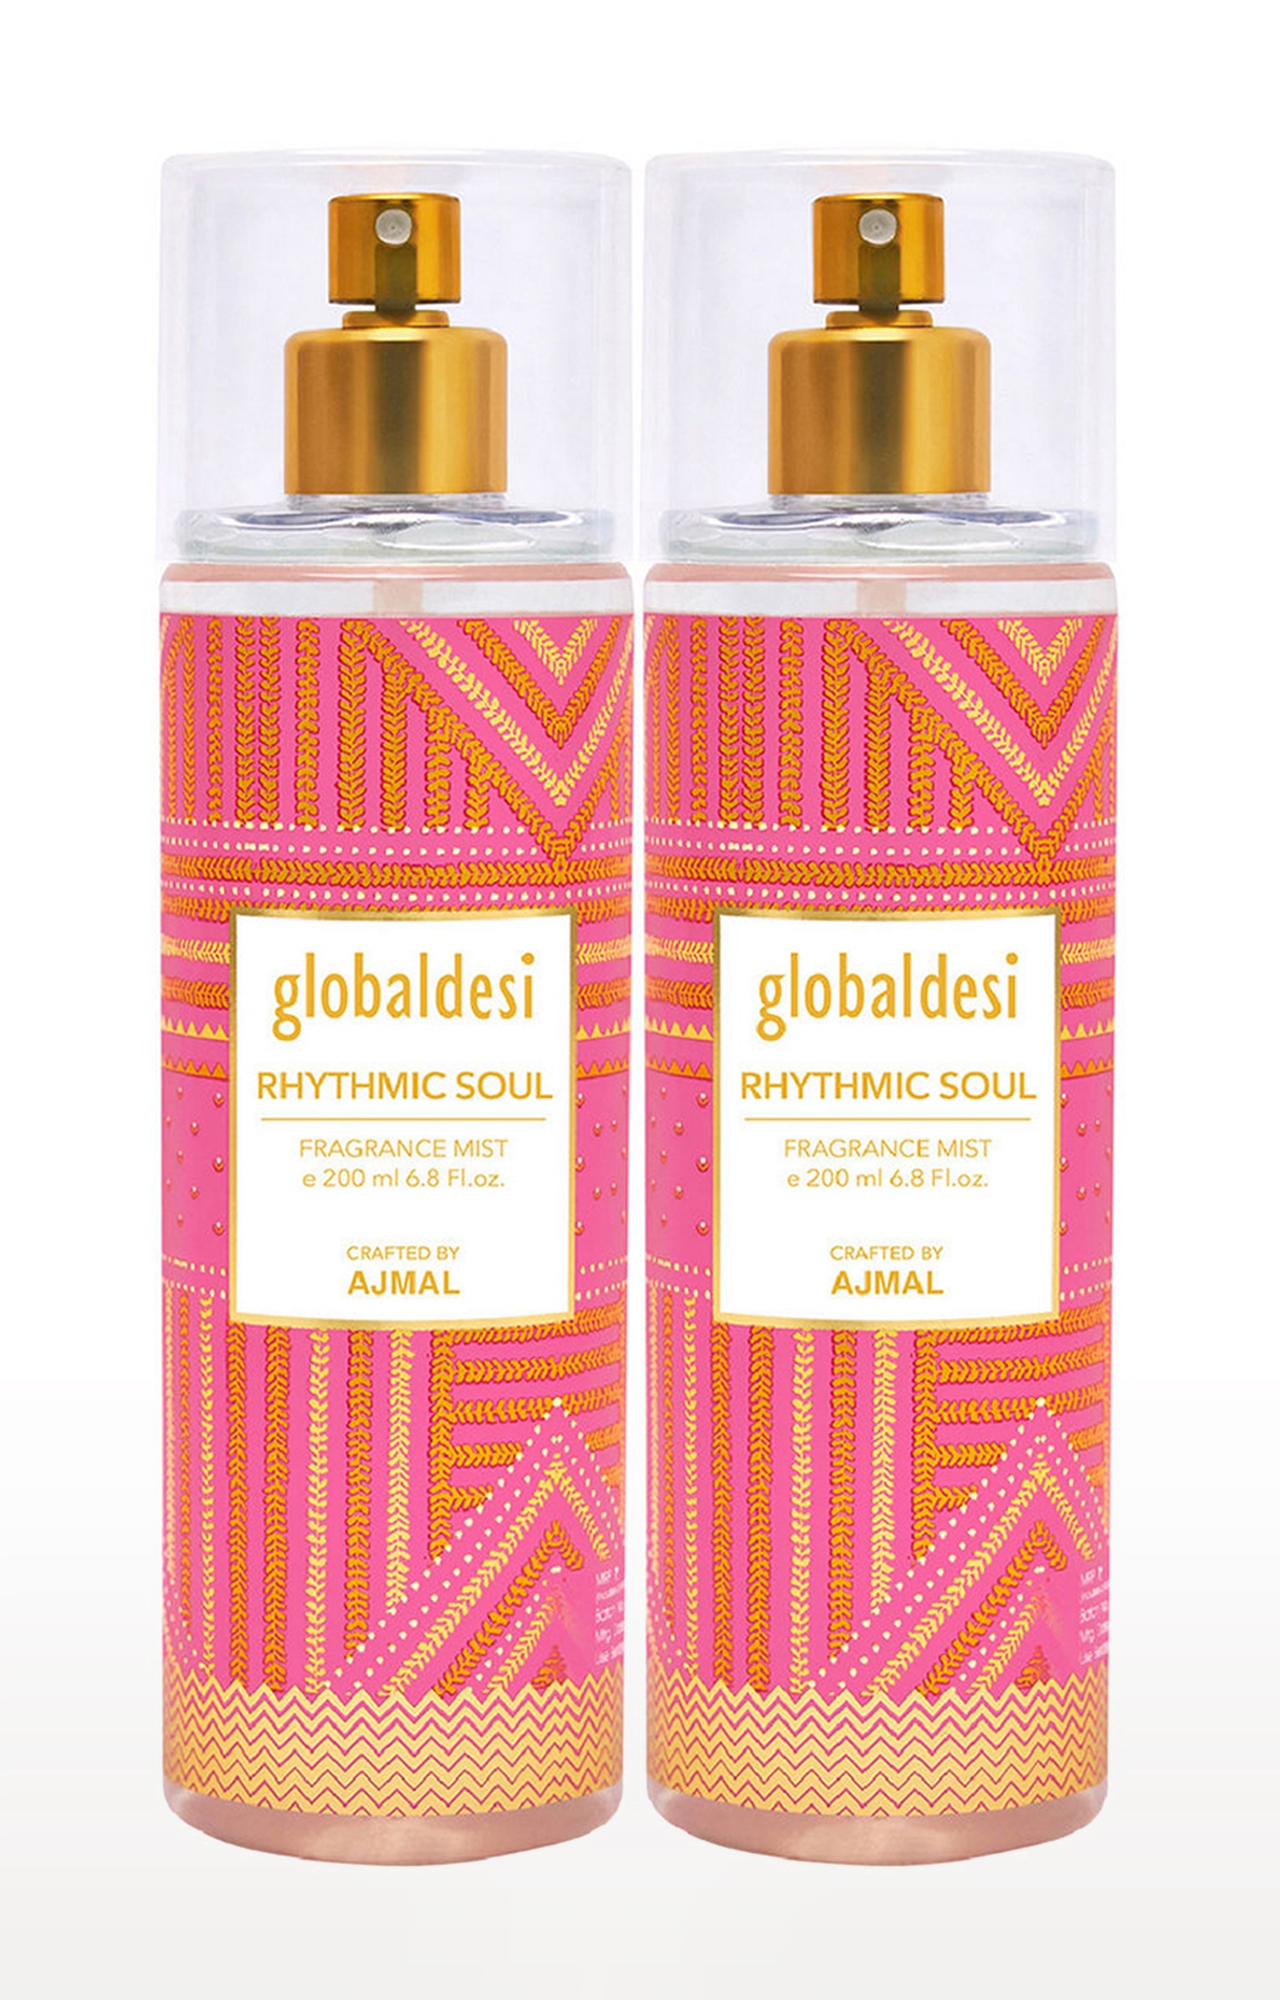 Global Desi Crafted By Ajmal | Global Desi Rhythmic Soul Pack of 2 Body Mist 200ML each Long Lasting Scent Spray Gift For Women Perfume Crafted by Ajmal FREE